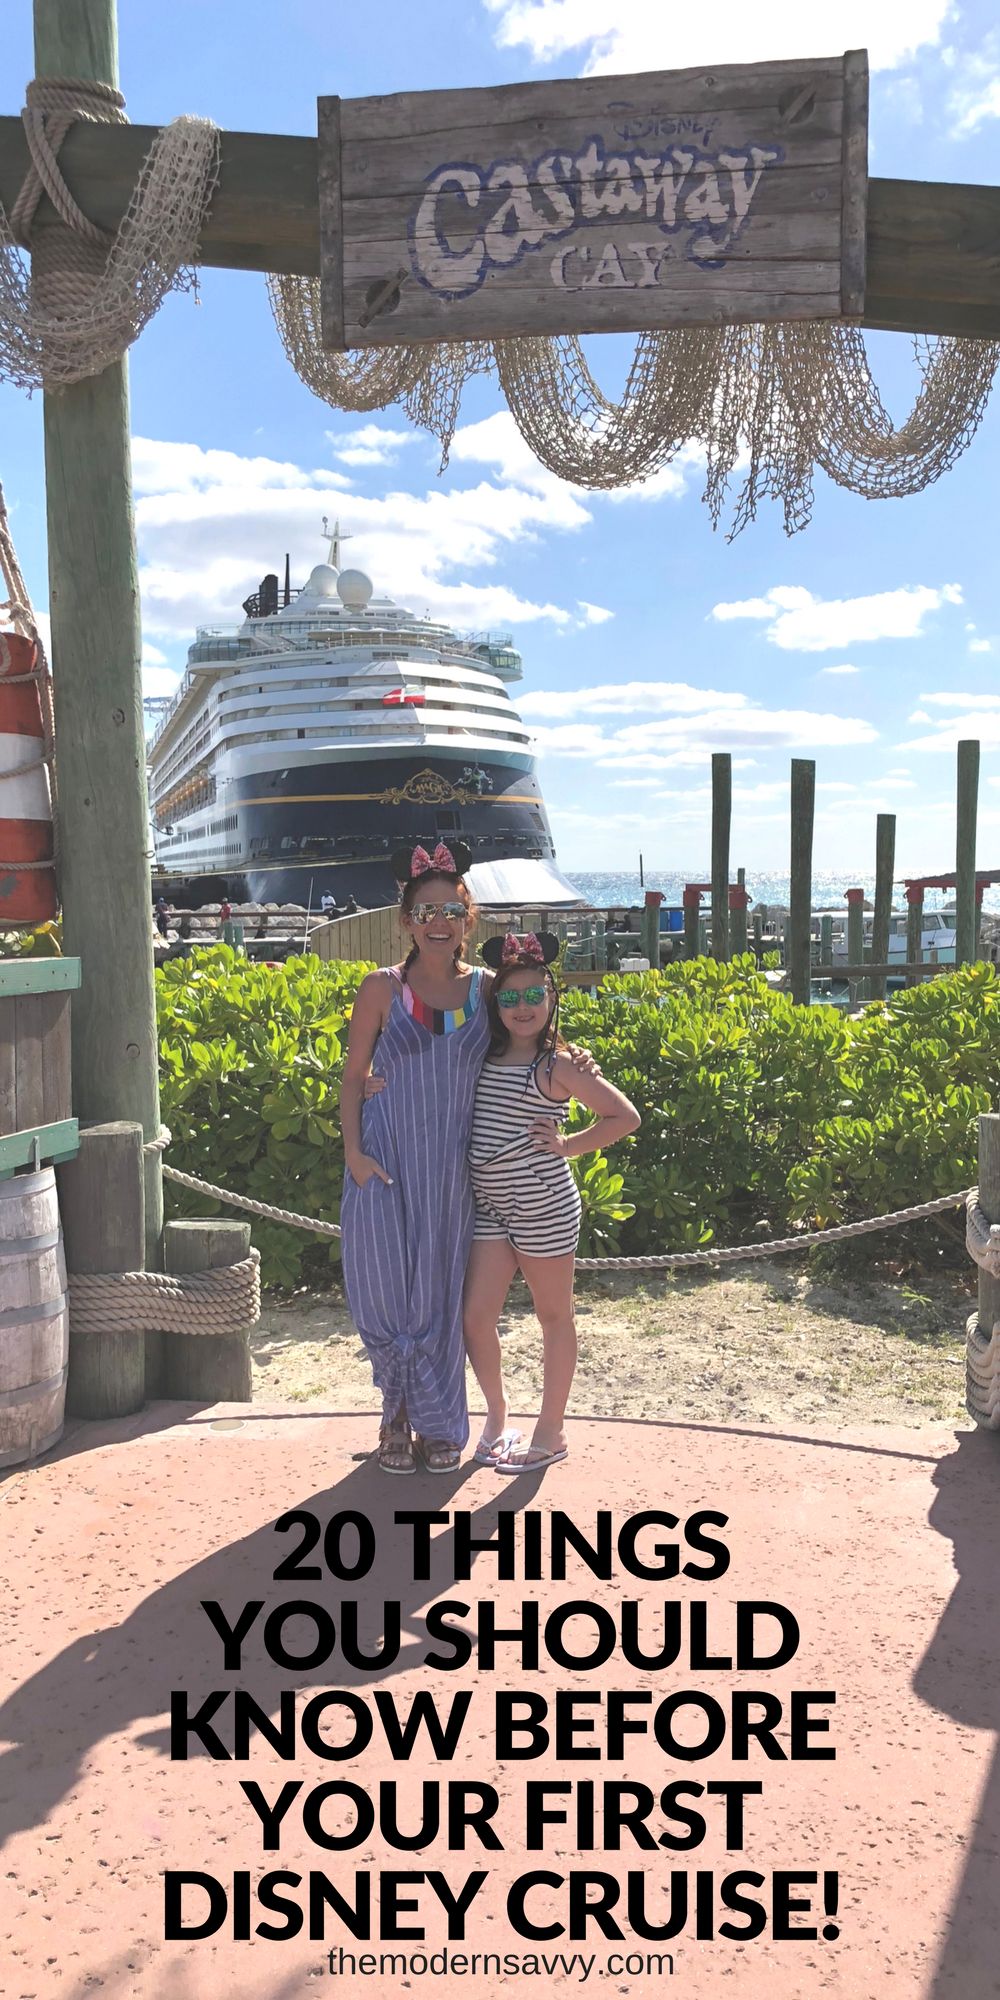 20 Things You Should Know Before Your FIrst Disney Cruise -- what to bring, what to expect, how to pack // the modern savvy, a florida-based life and style blog